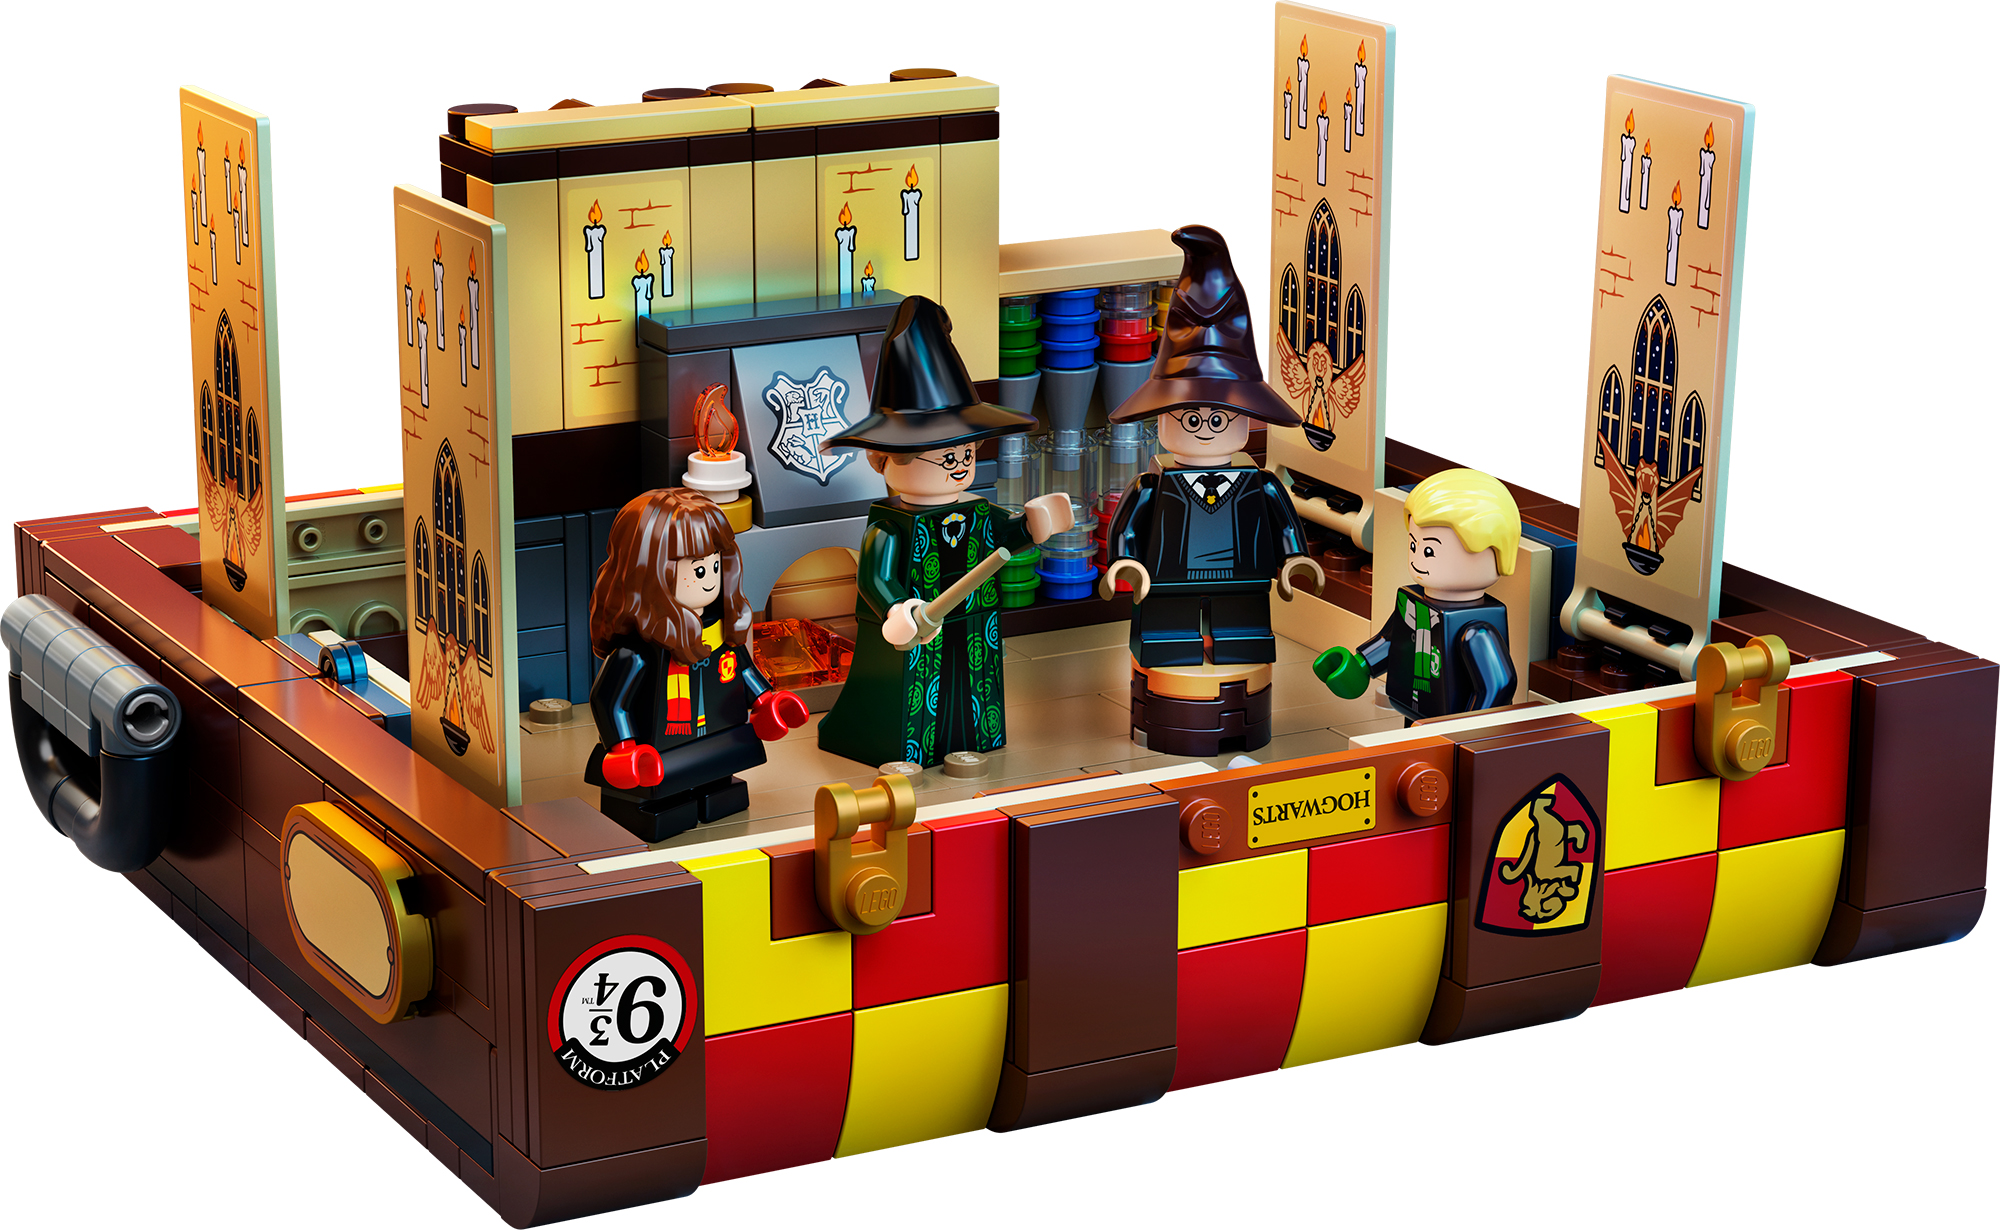 LEGO-trunk-bth-gift-guide